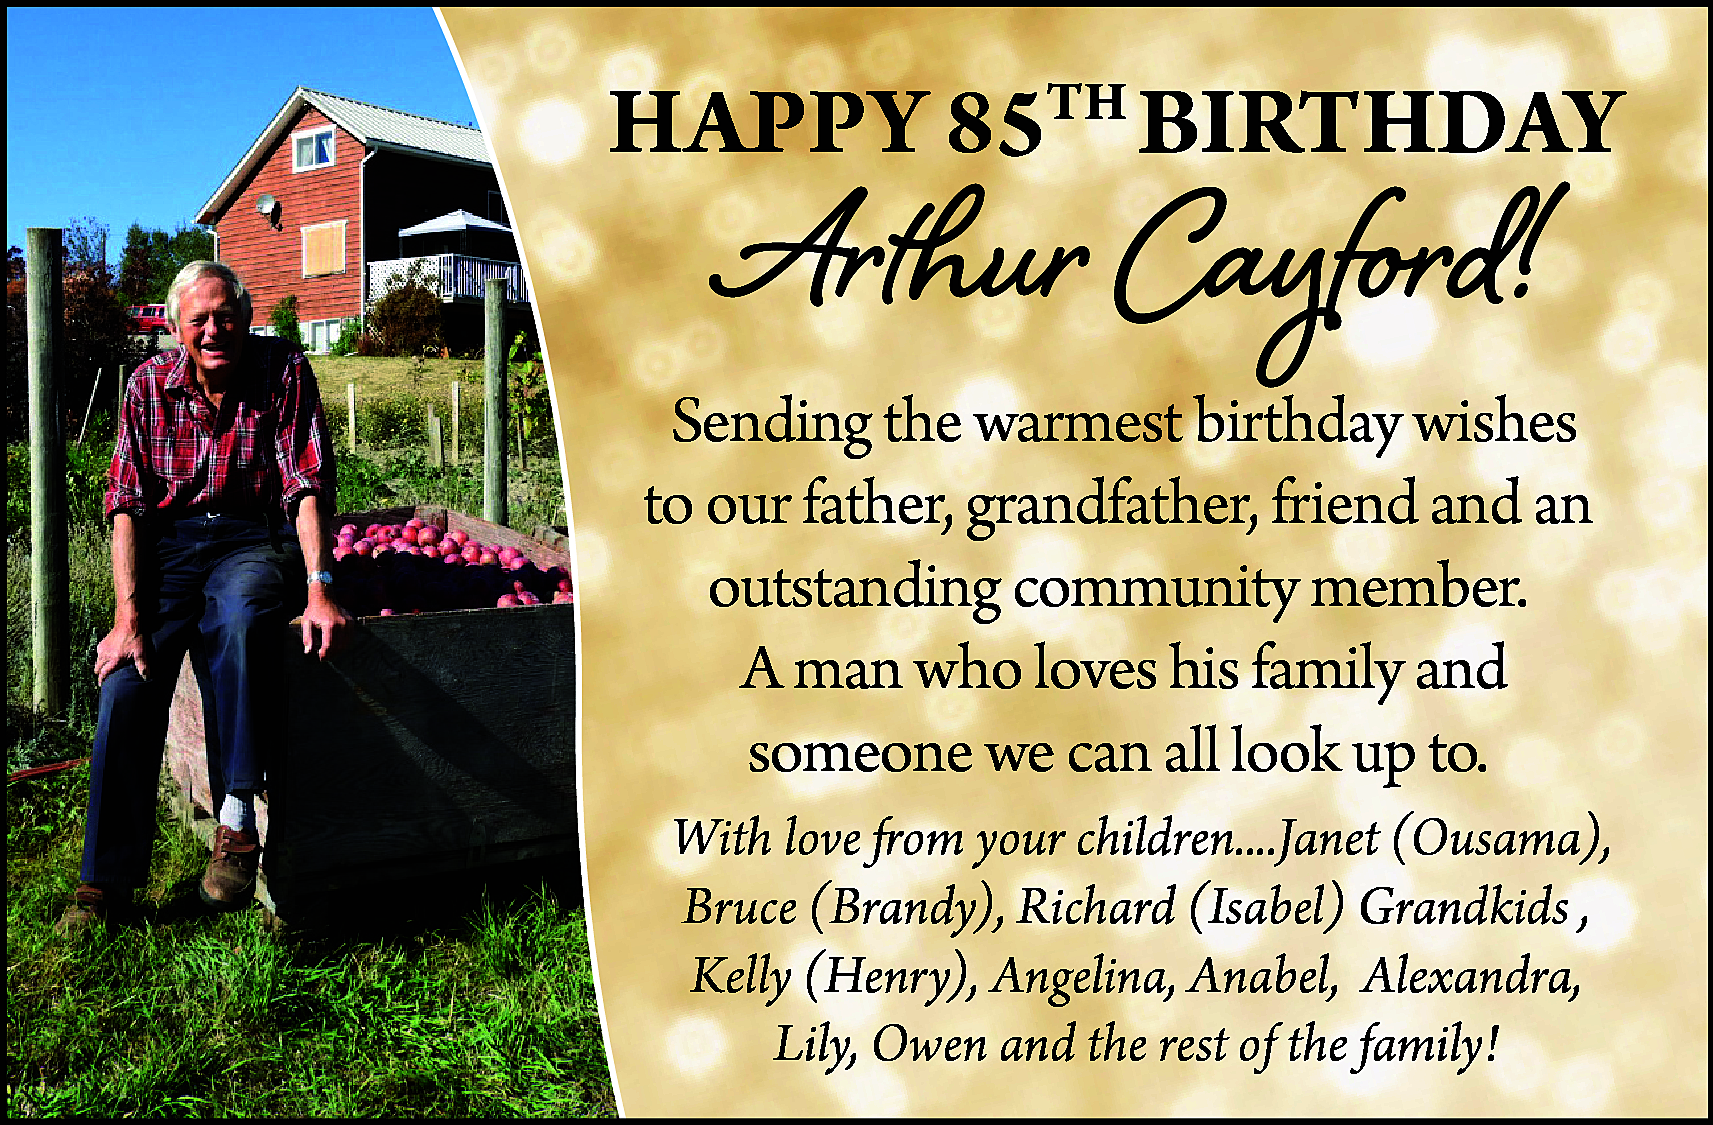 HAPPY 85TH BIRTHDAY <br> <br>Arthur  HAPPY 85TH BIRTHDAY    Arthur Cayford!    Sending the warmest birthday wishes  to our father, grandfather, friend and an  outstanding community member.  A man who loves his family and  someone we can all look up to.  With love from your children....Janet (Ousama),  Bruce (Brandy), Richard (Isabel) Grandkids ,  Kelly (Henry), Angelina, Anabel, Alexandra,  Lily, Owen and the rest of the family!    